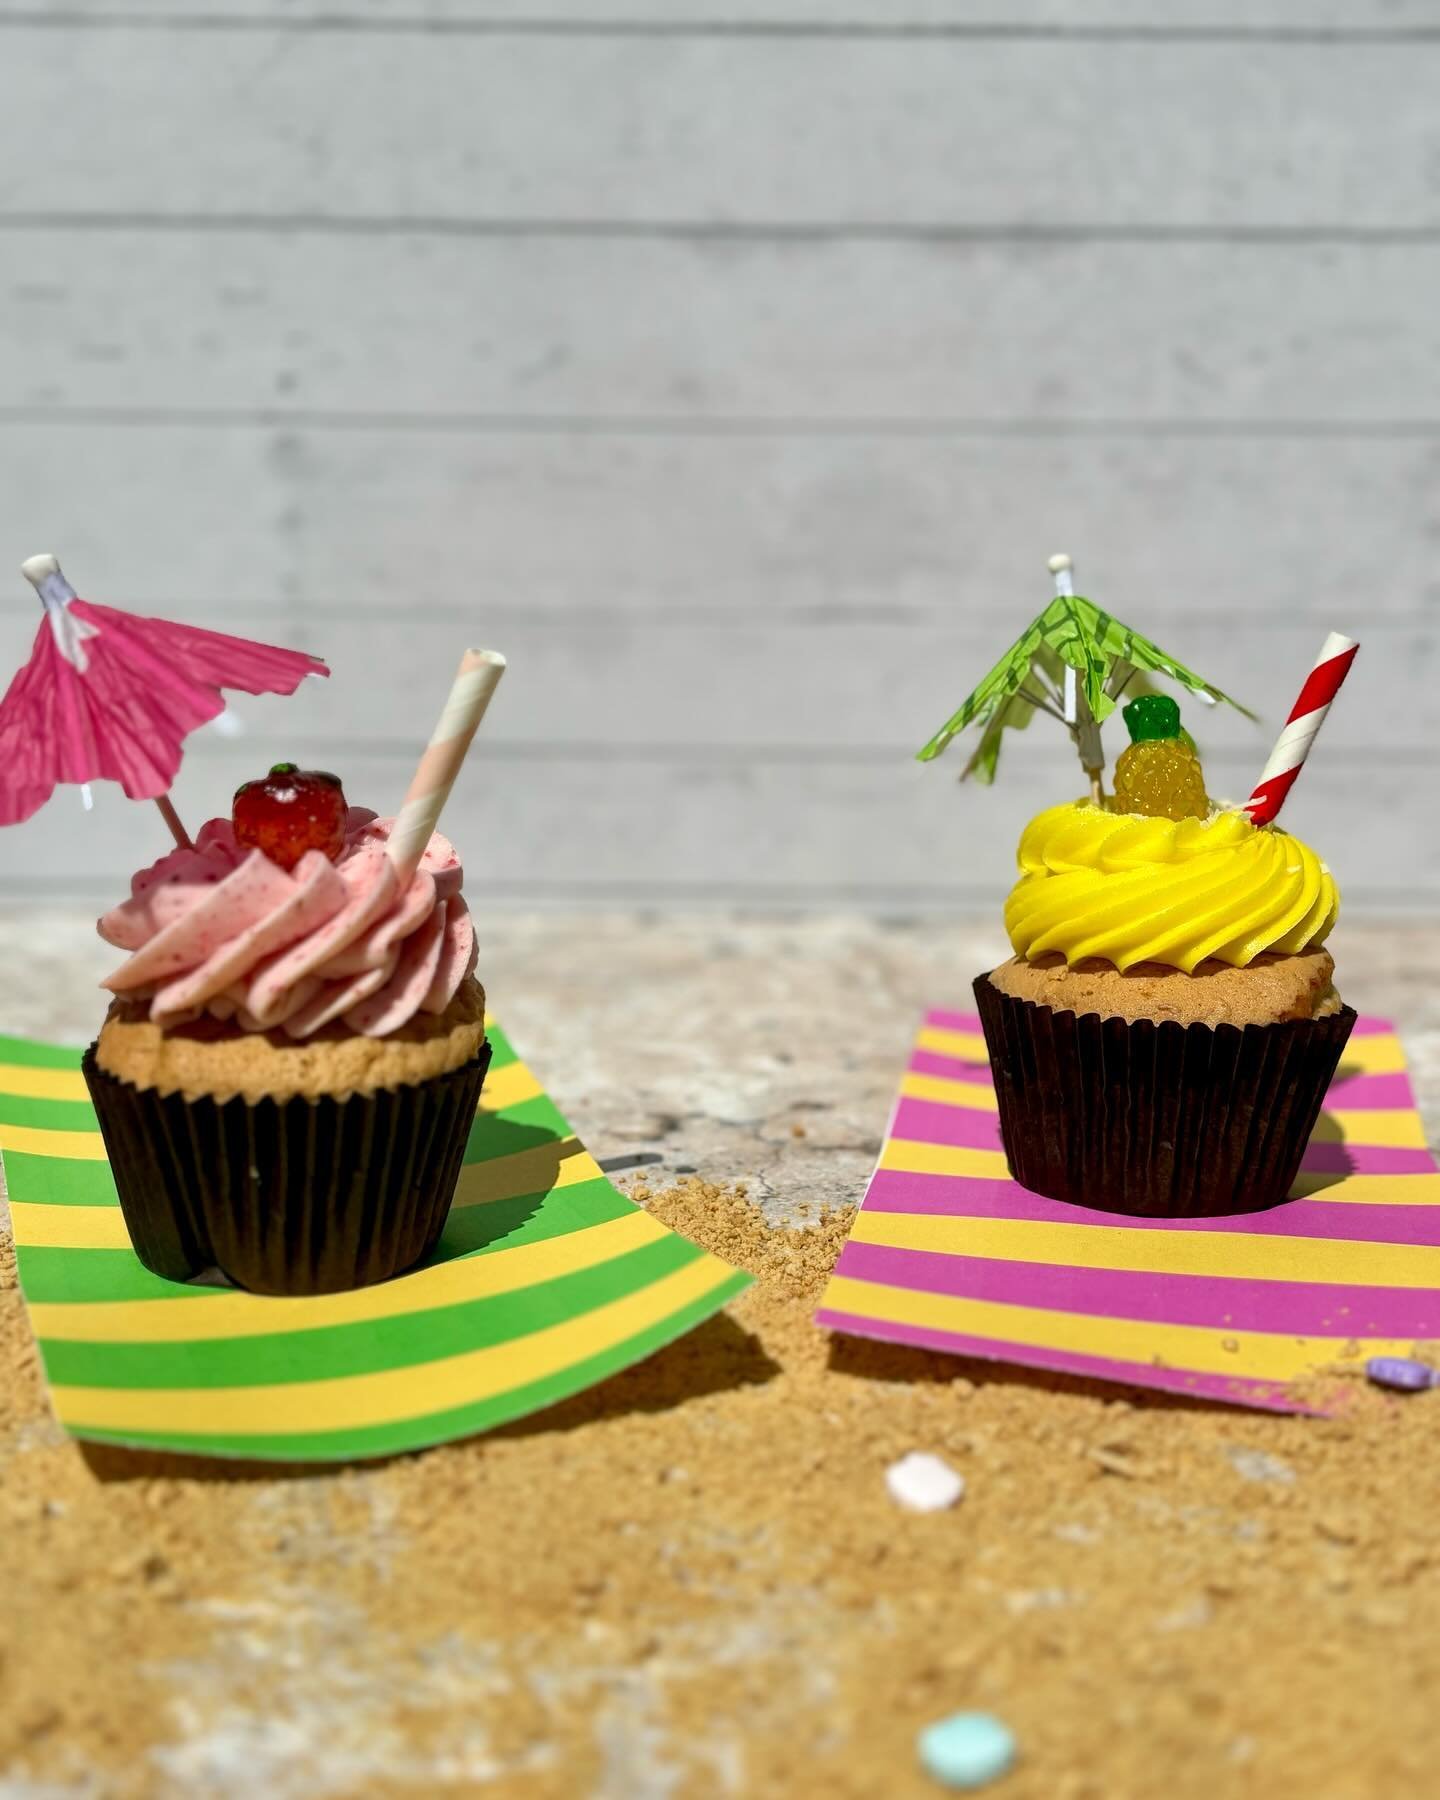 You look like you could use a drink🍹 We&rsquo;ve got Pi&ntilde;a Colada and Strawberry Daiquiri cupcakes available in the shop now until Cinco de Mayo!

It&rsquo;s five o&rsquo;clock somewhere! (But not here, because that&rsquo;s when we close)

*No